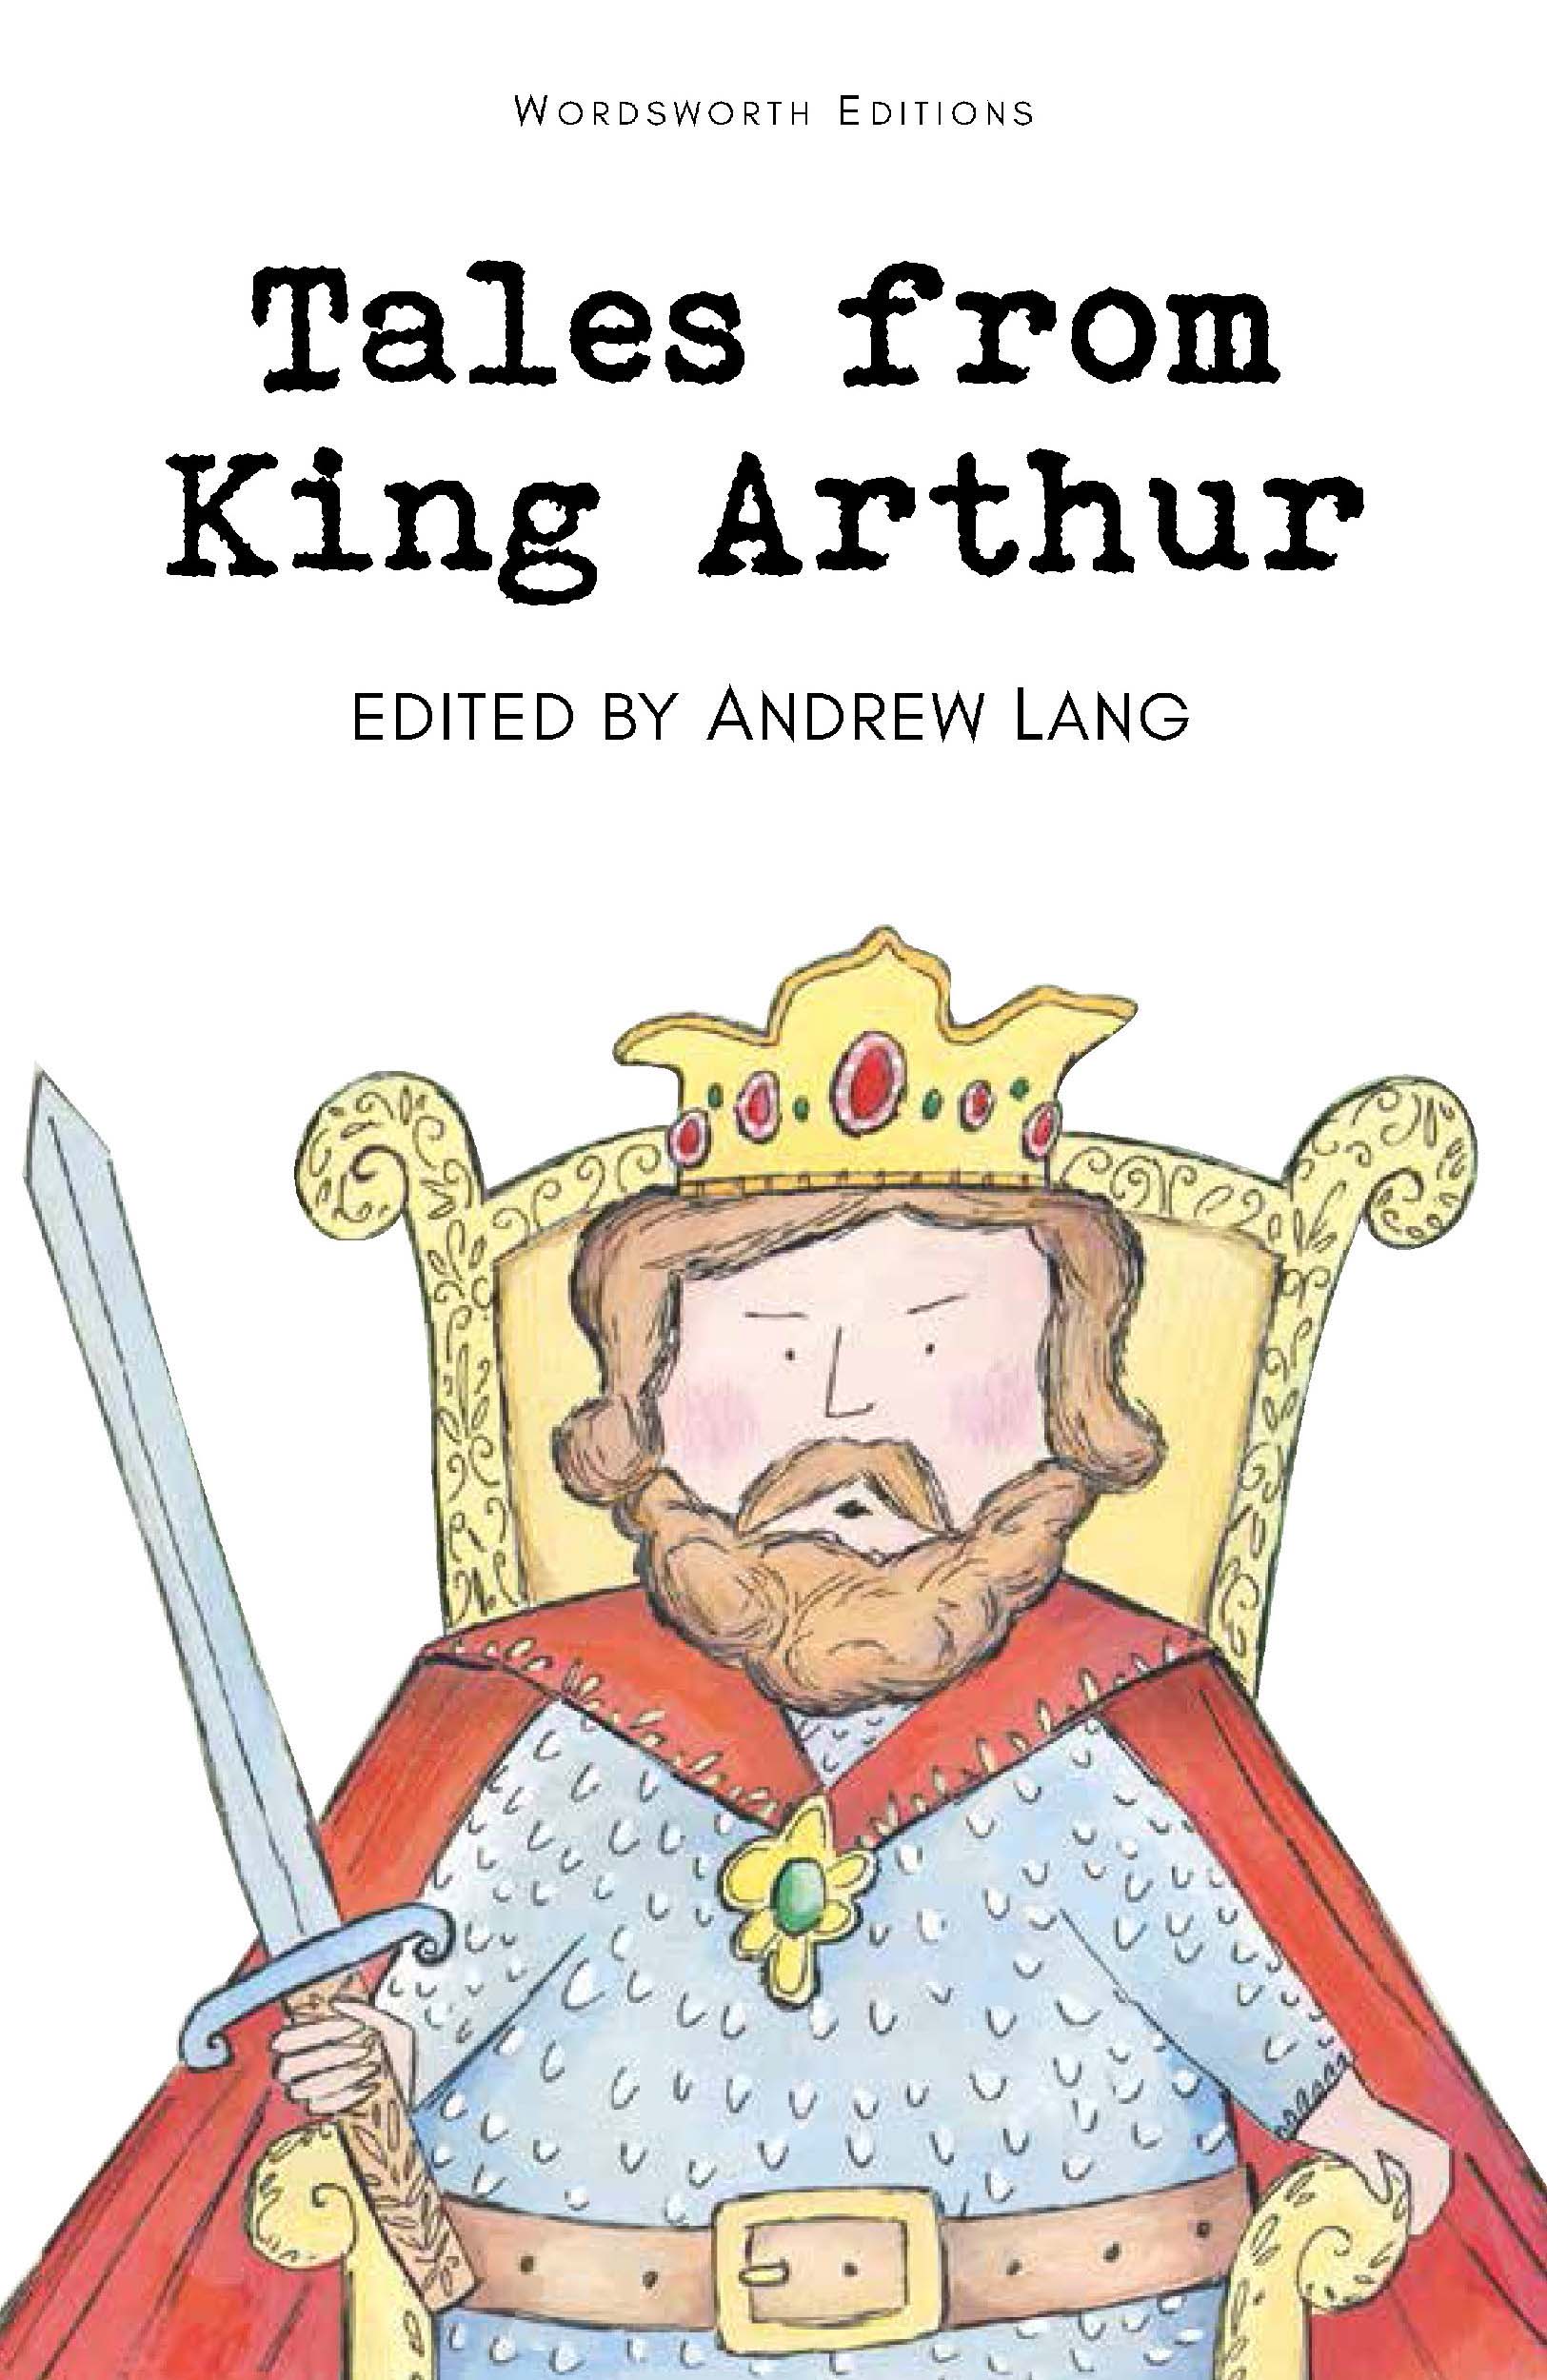 Tales from King Arthur - Wordsworth Editions